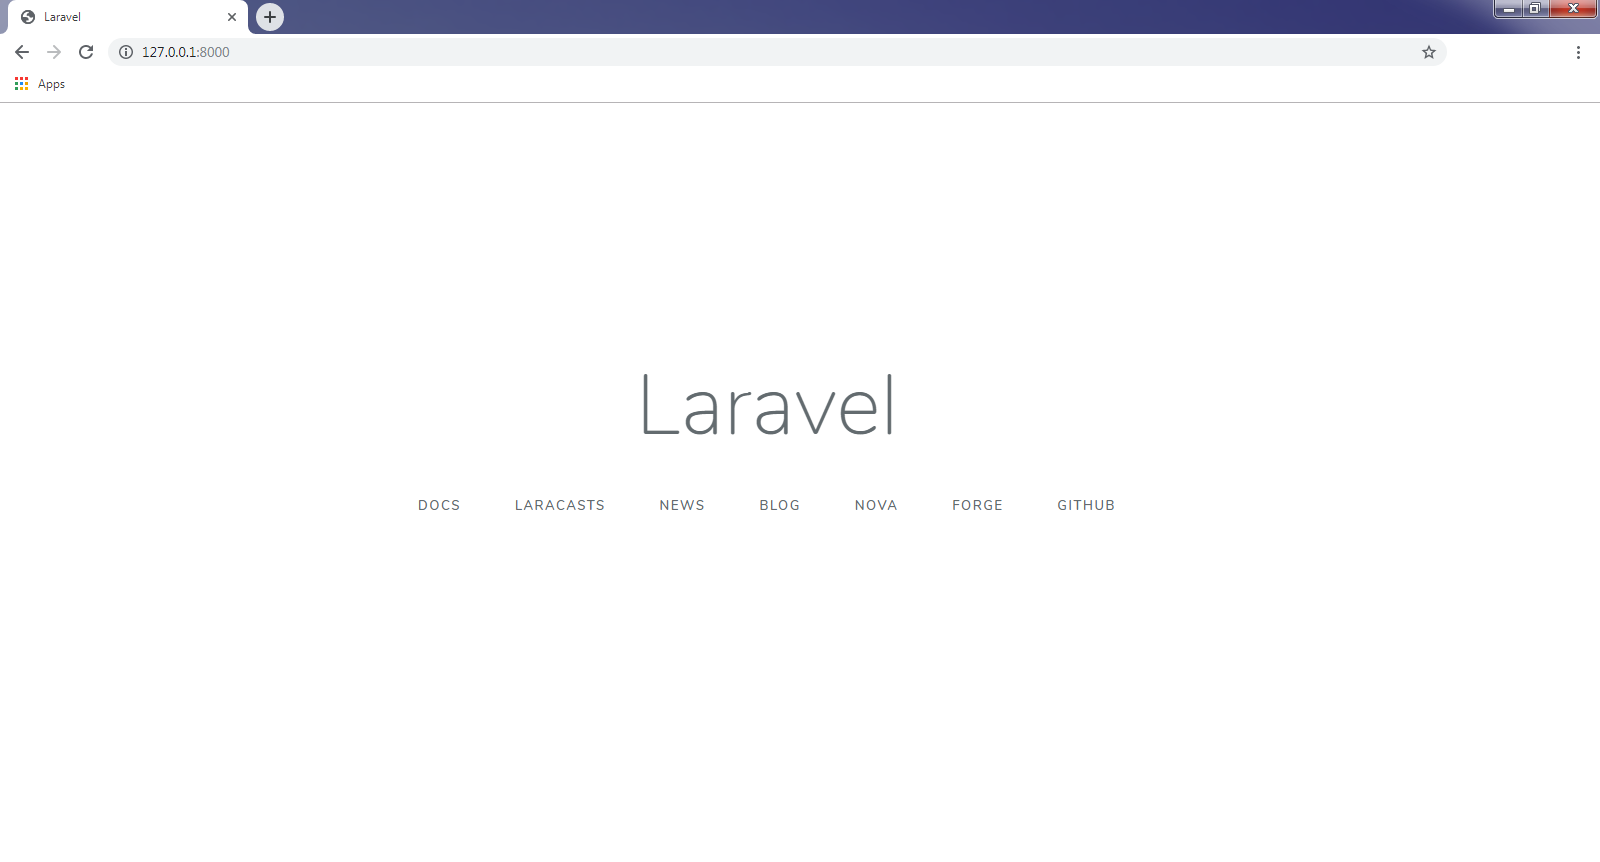 First look at laravel's introduction and interface